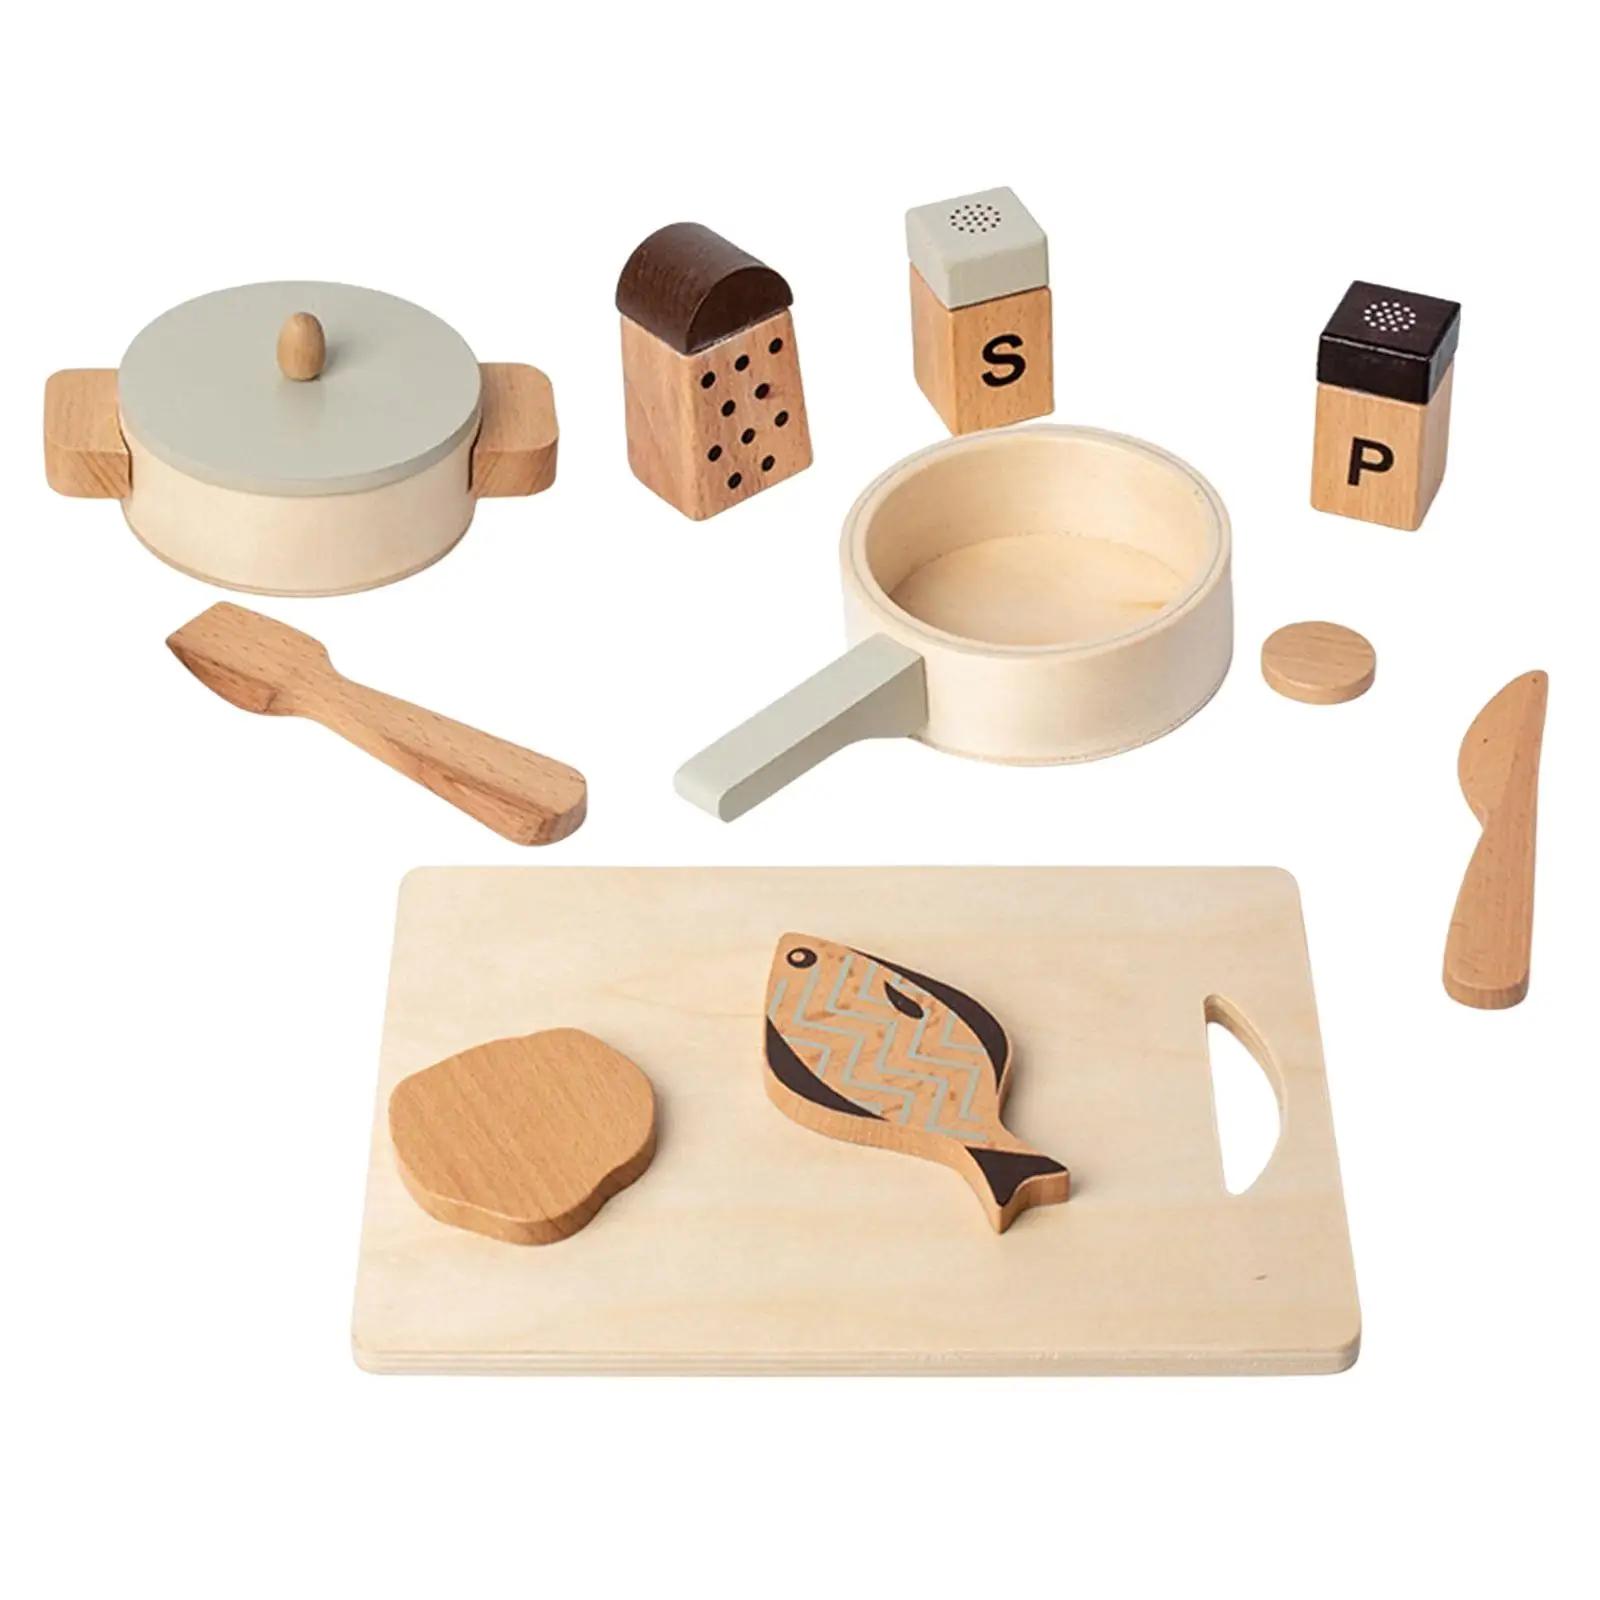 Wooden Kitchen Playset, Pretend Toy Pot Pan Spice Bottle Gift Cookware Simulation Cooking for Girls Boys Toddlers